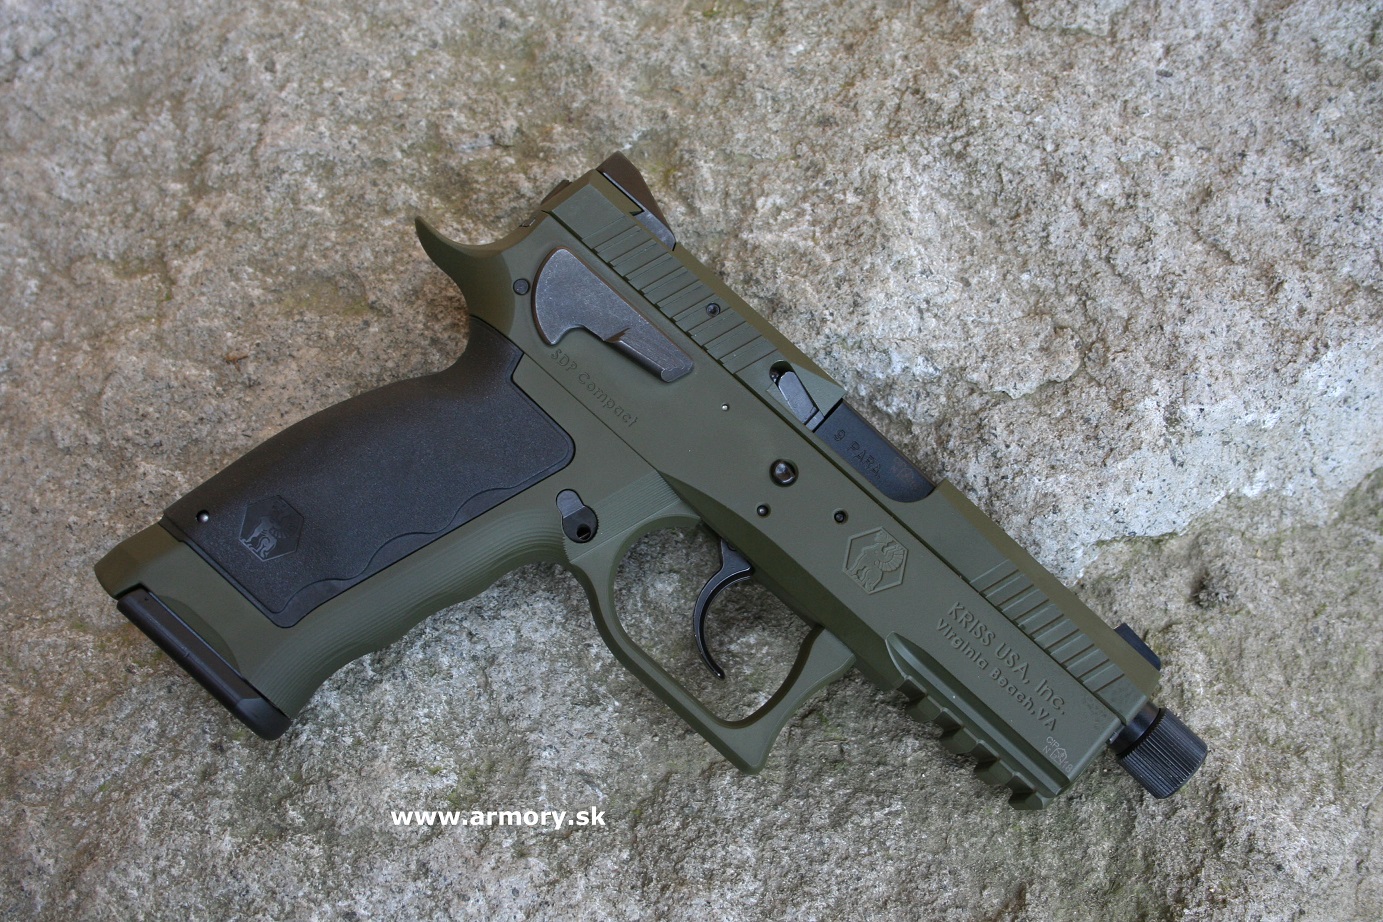 Sphinx Krypton Compact 9mm Ceracoat for sale at